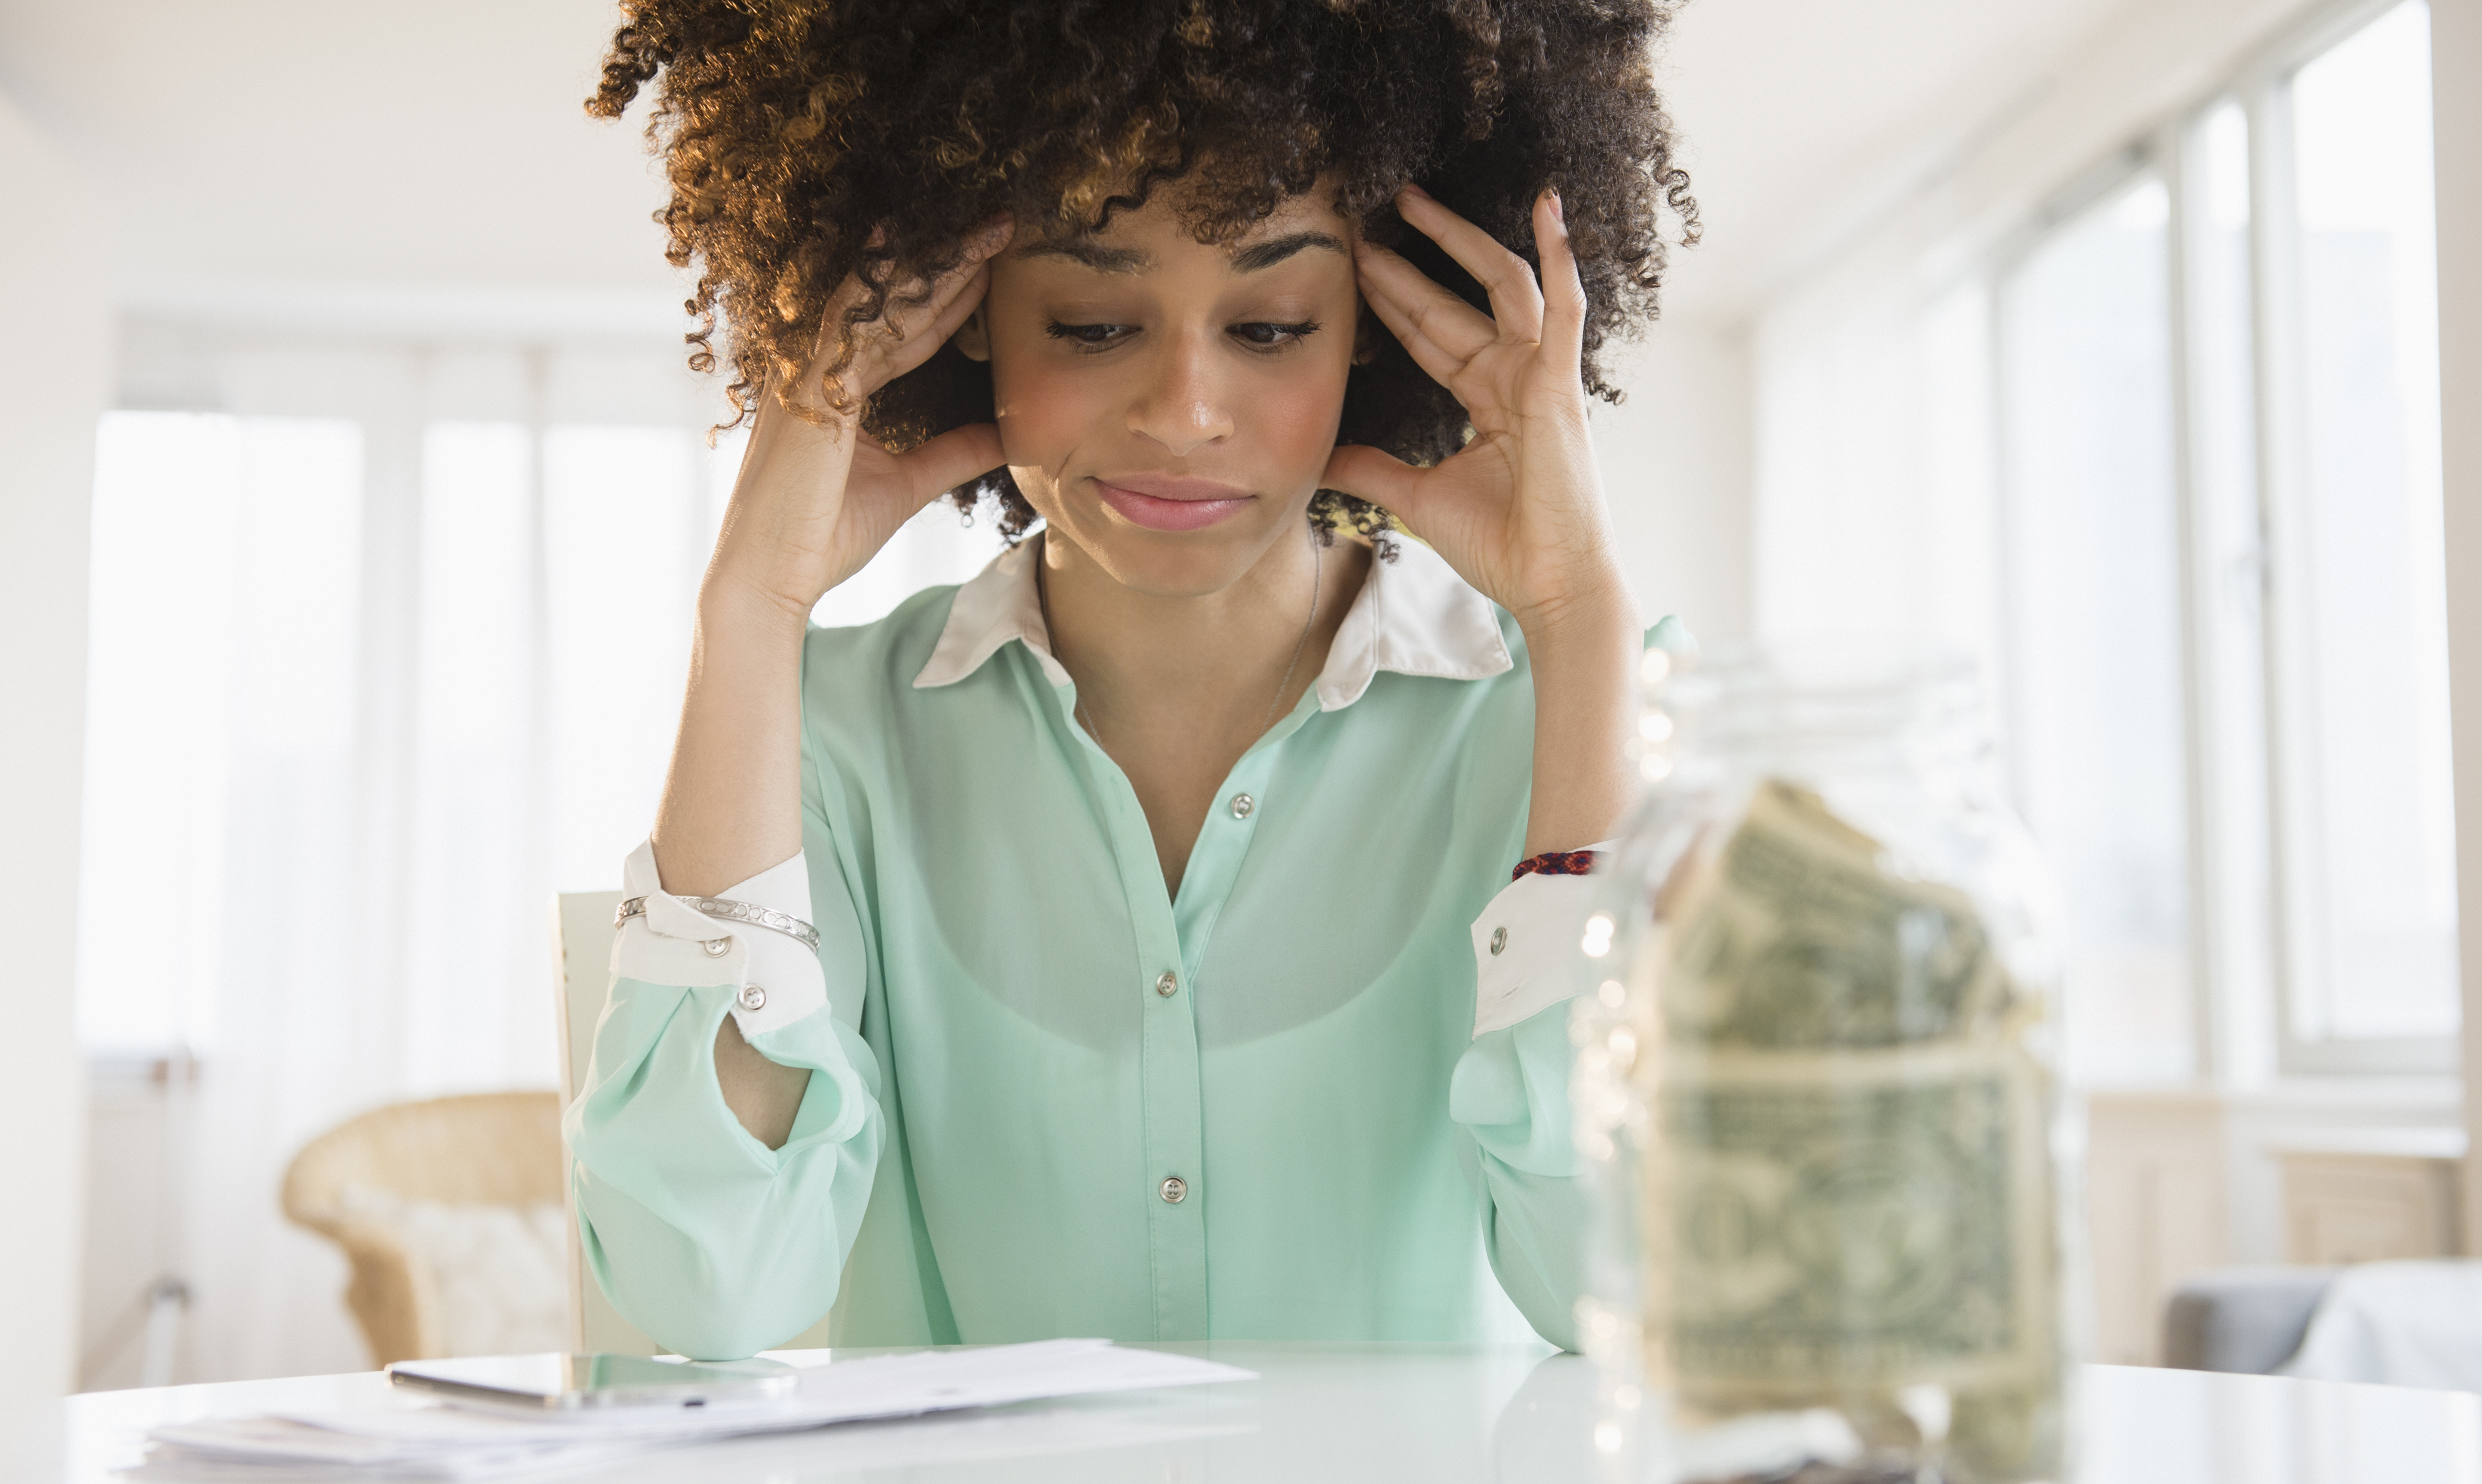 Personal Finance Advice for Women Who Struggle with Money